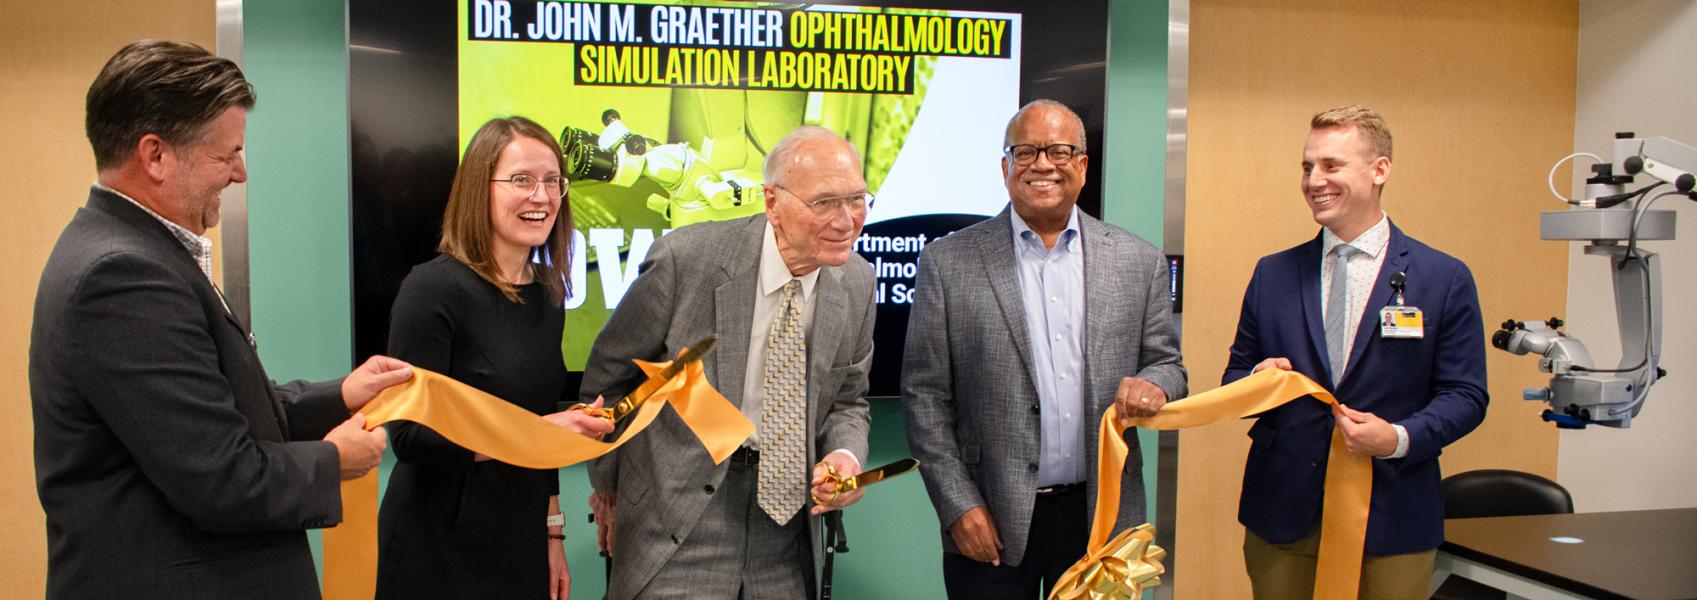 Dr. John M. Graether Ophthalmology Simulation Laboratory Open House